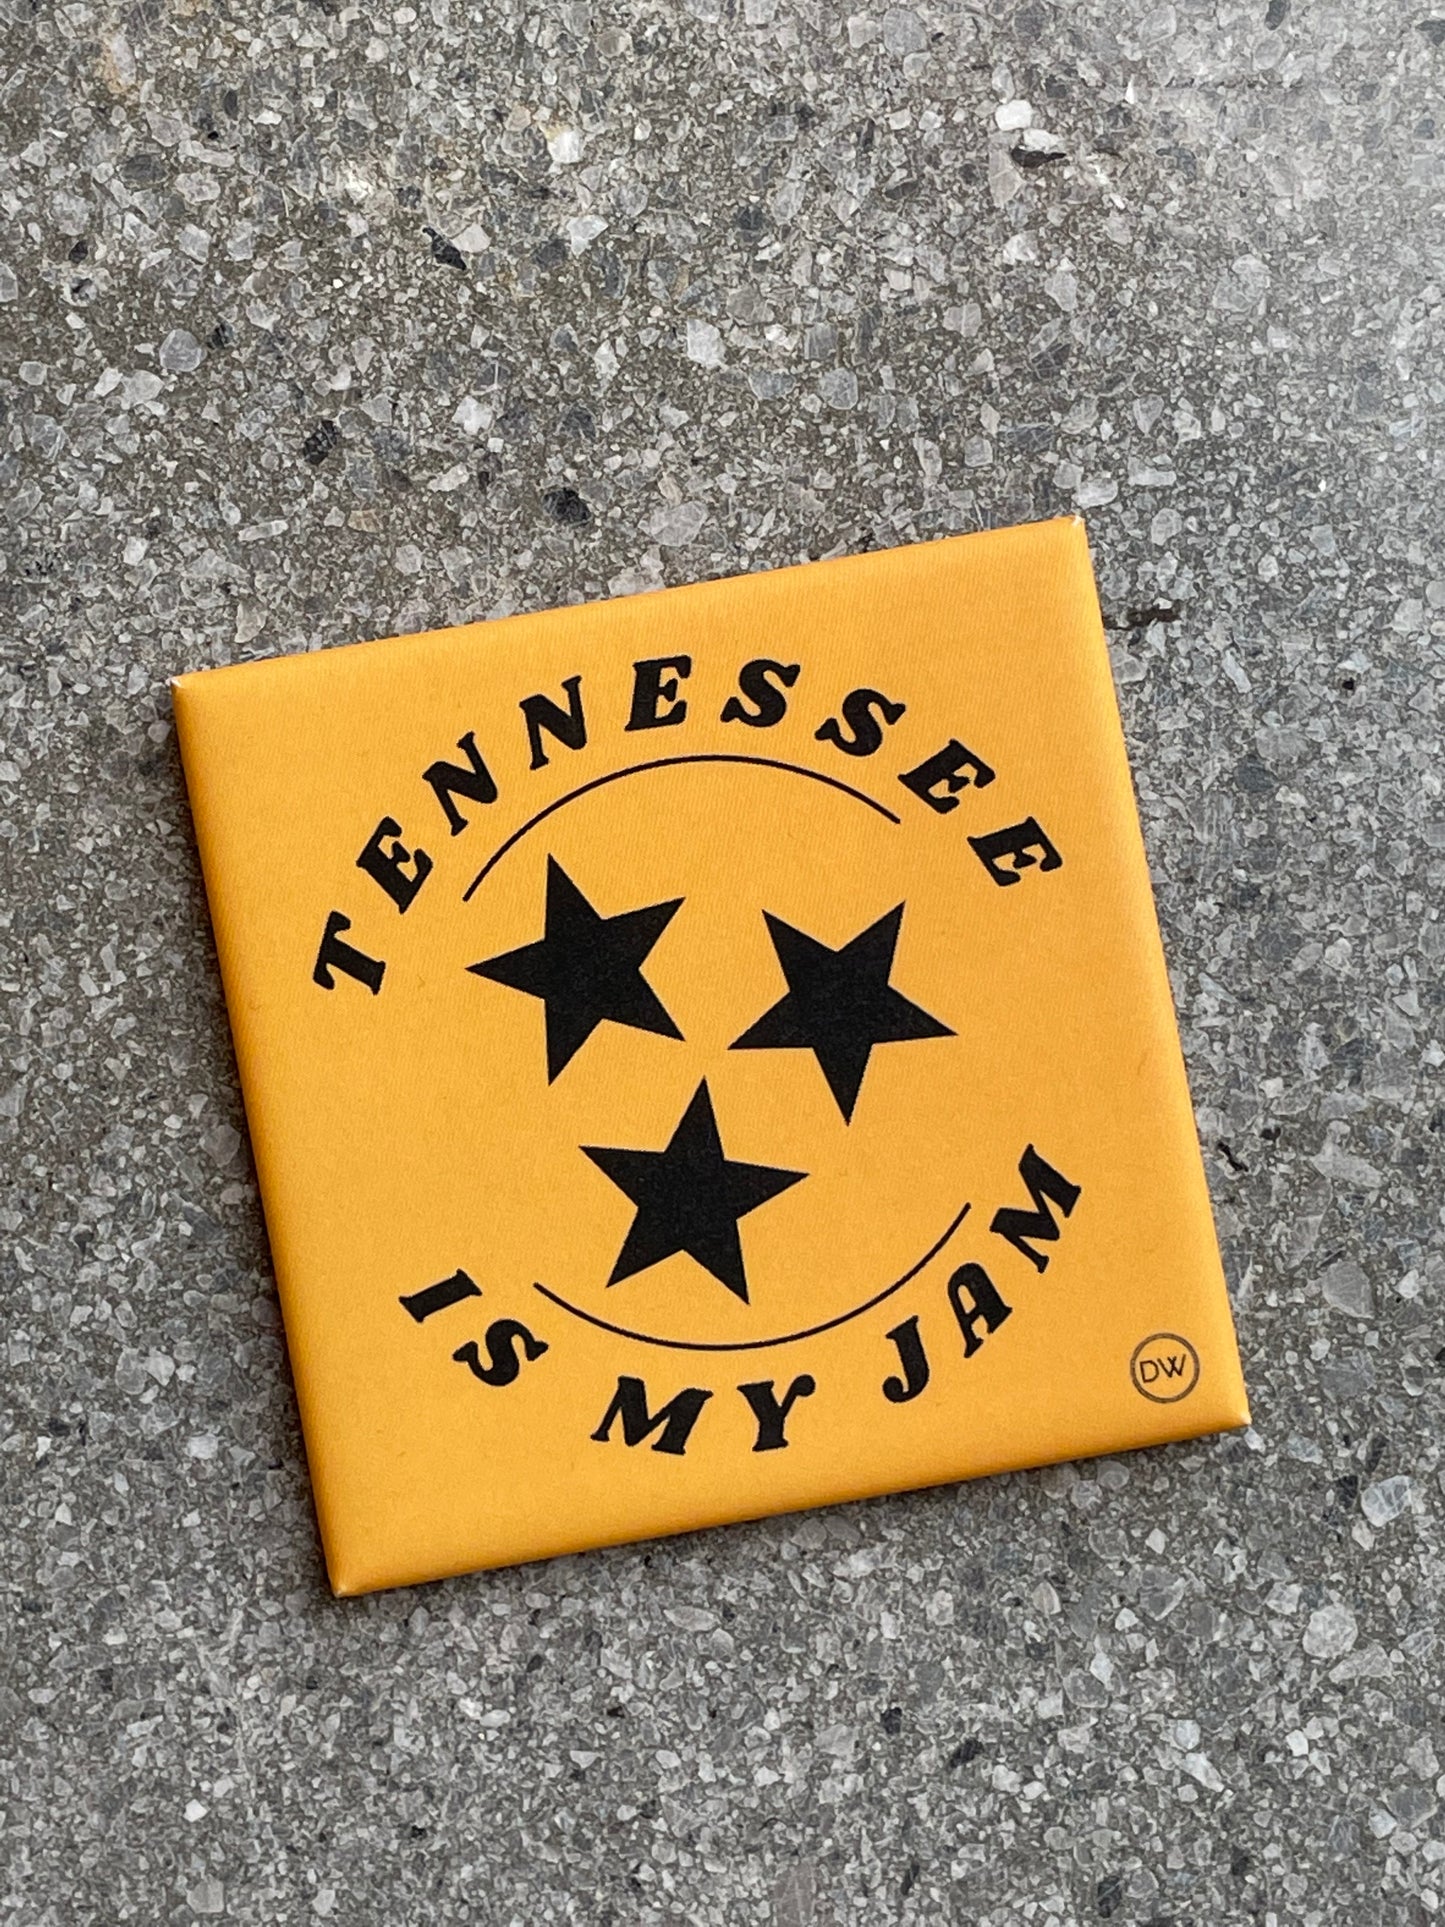 The Tennessee is My Jam 2.0 Magnet